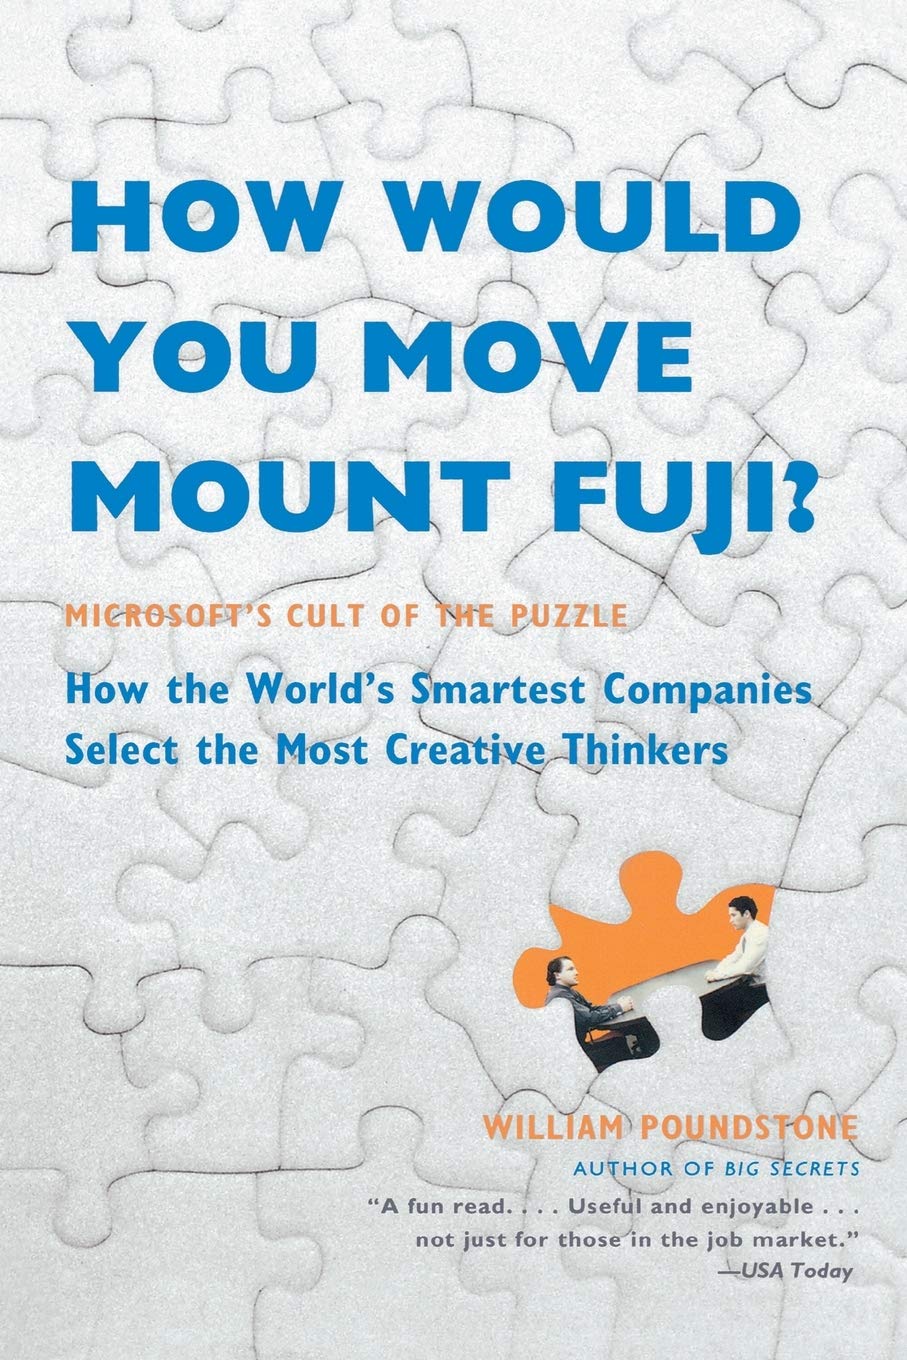 How Would You Move Mount Fuji? Microsoft's Cult of the Puzzle - How the World's Smartest Companies Select the Most Creative Thinkers